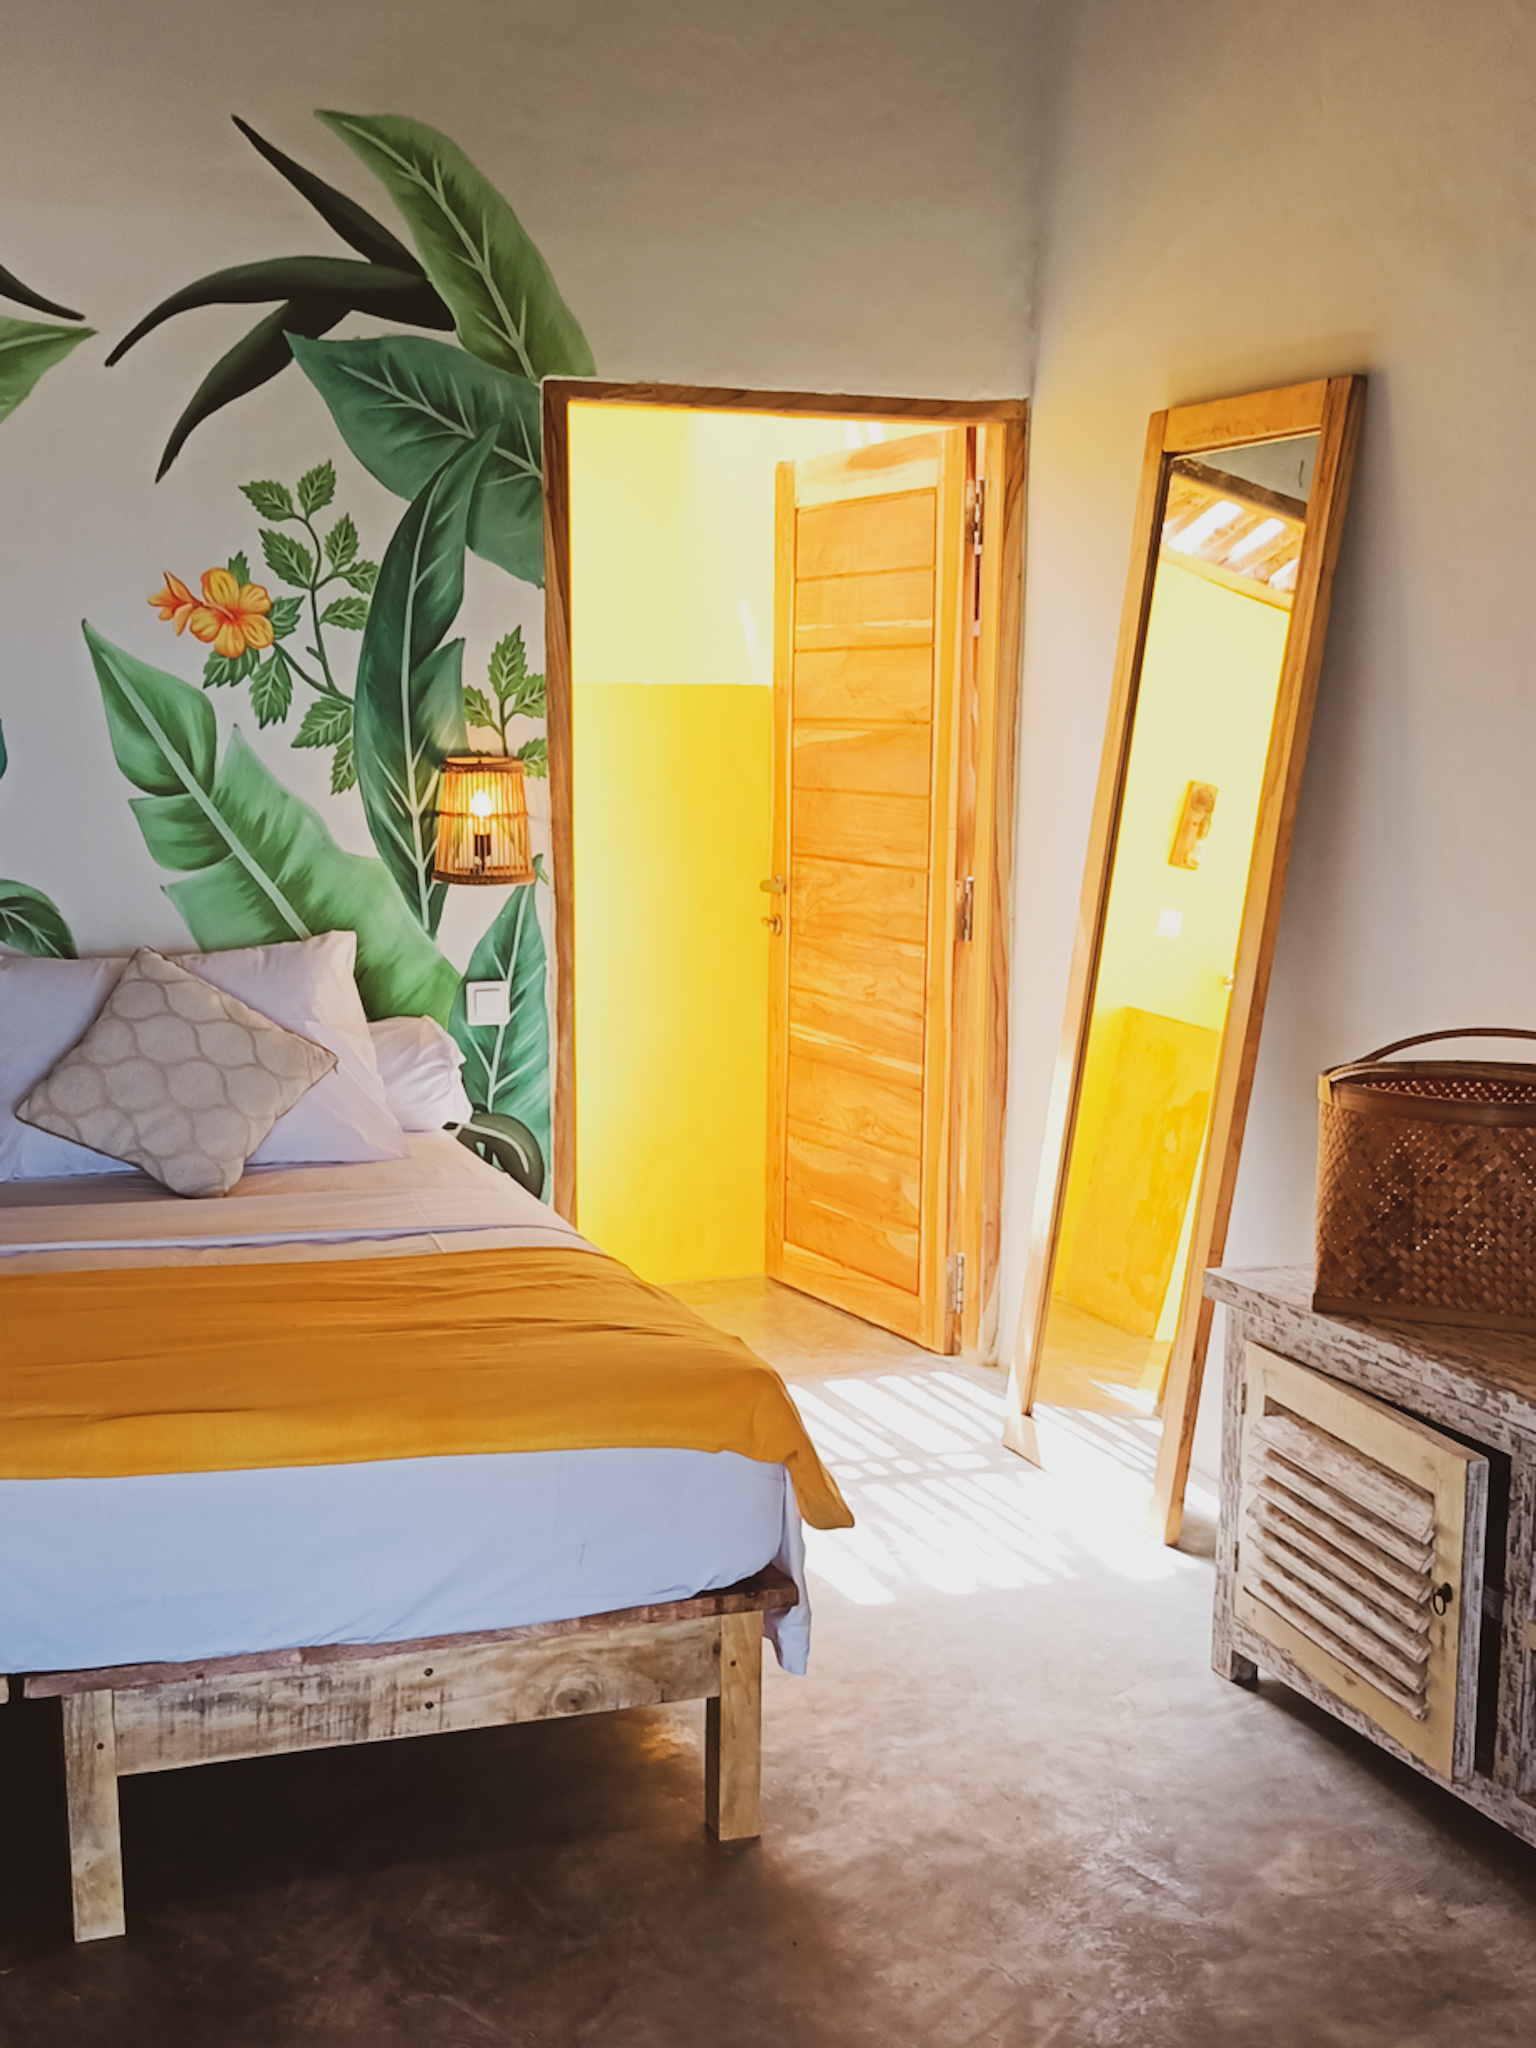 FabuLous Place Lombok surf villa yellow bedroom with wall painting and large floor mirror